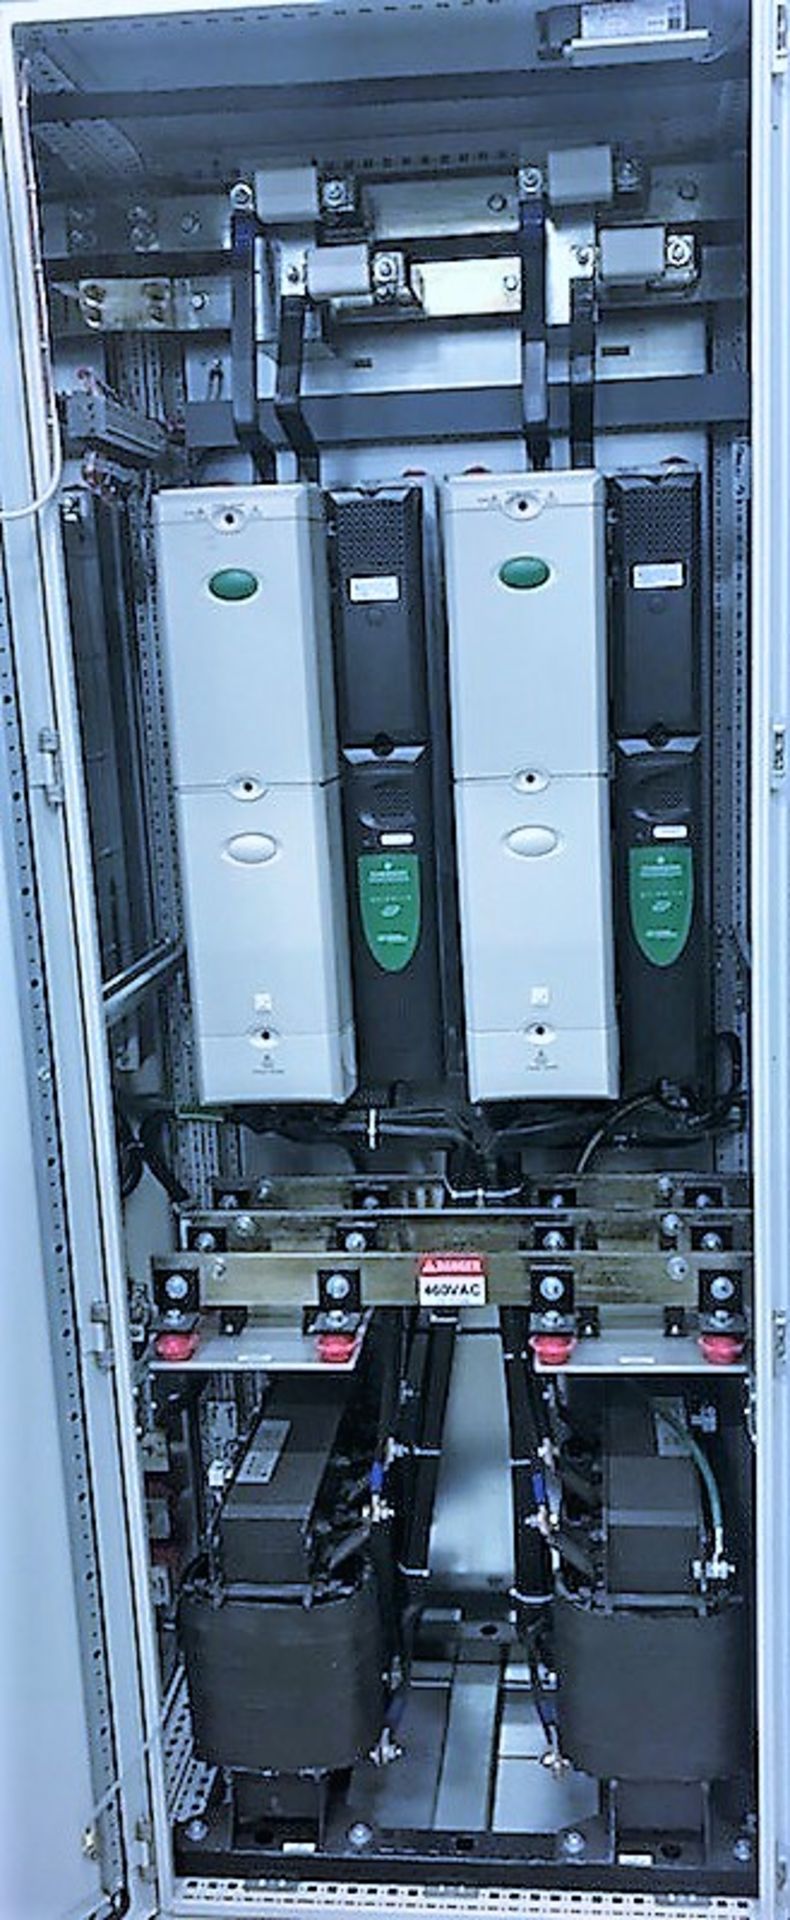 (7) CONJOINED CABINETS W/ (1) EMERSON CTLR 0151 PHASE 1 CONTROLLER, MODEL ECOP12061-01, S/N 12061- - Image 5 of 8